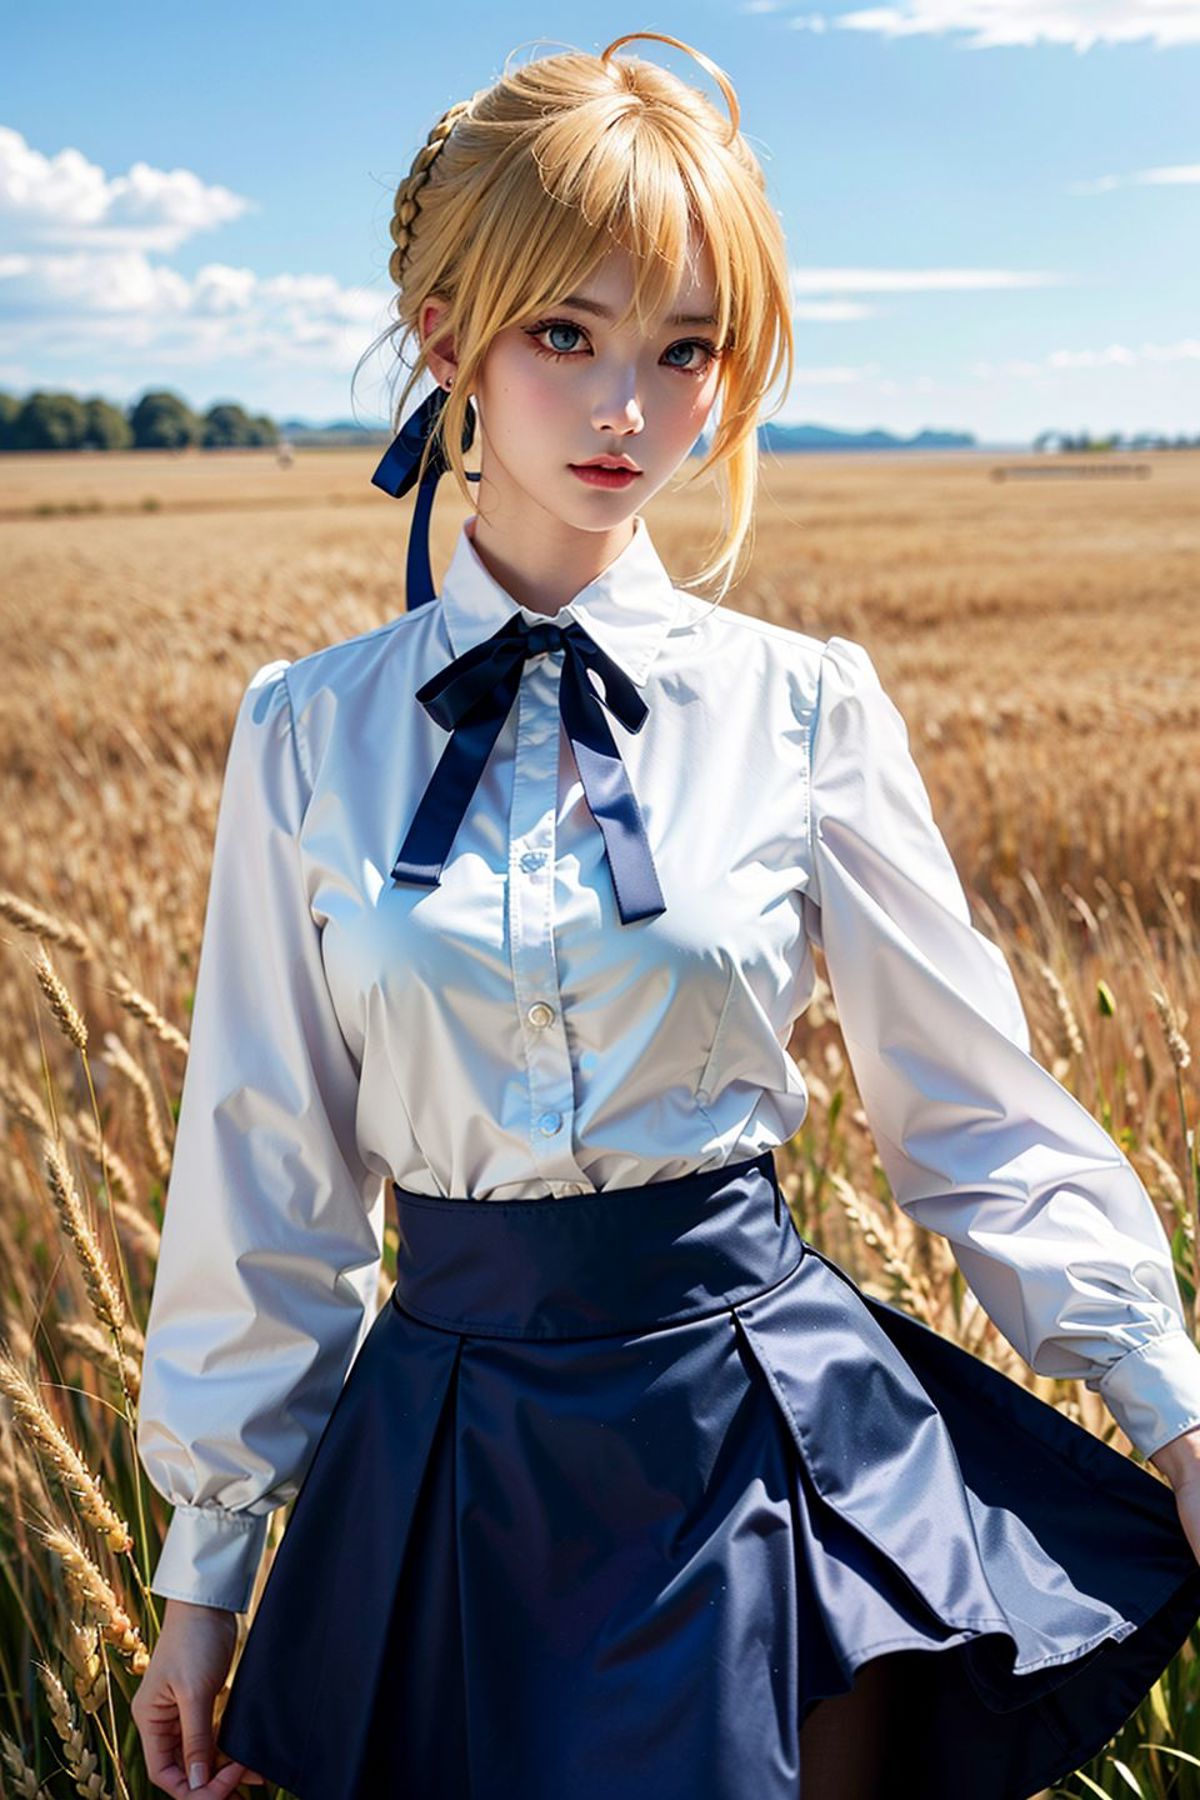 Saber 常服 FATE Saber image by ylnnn